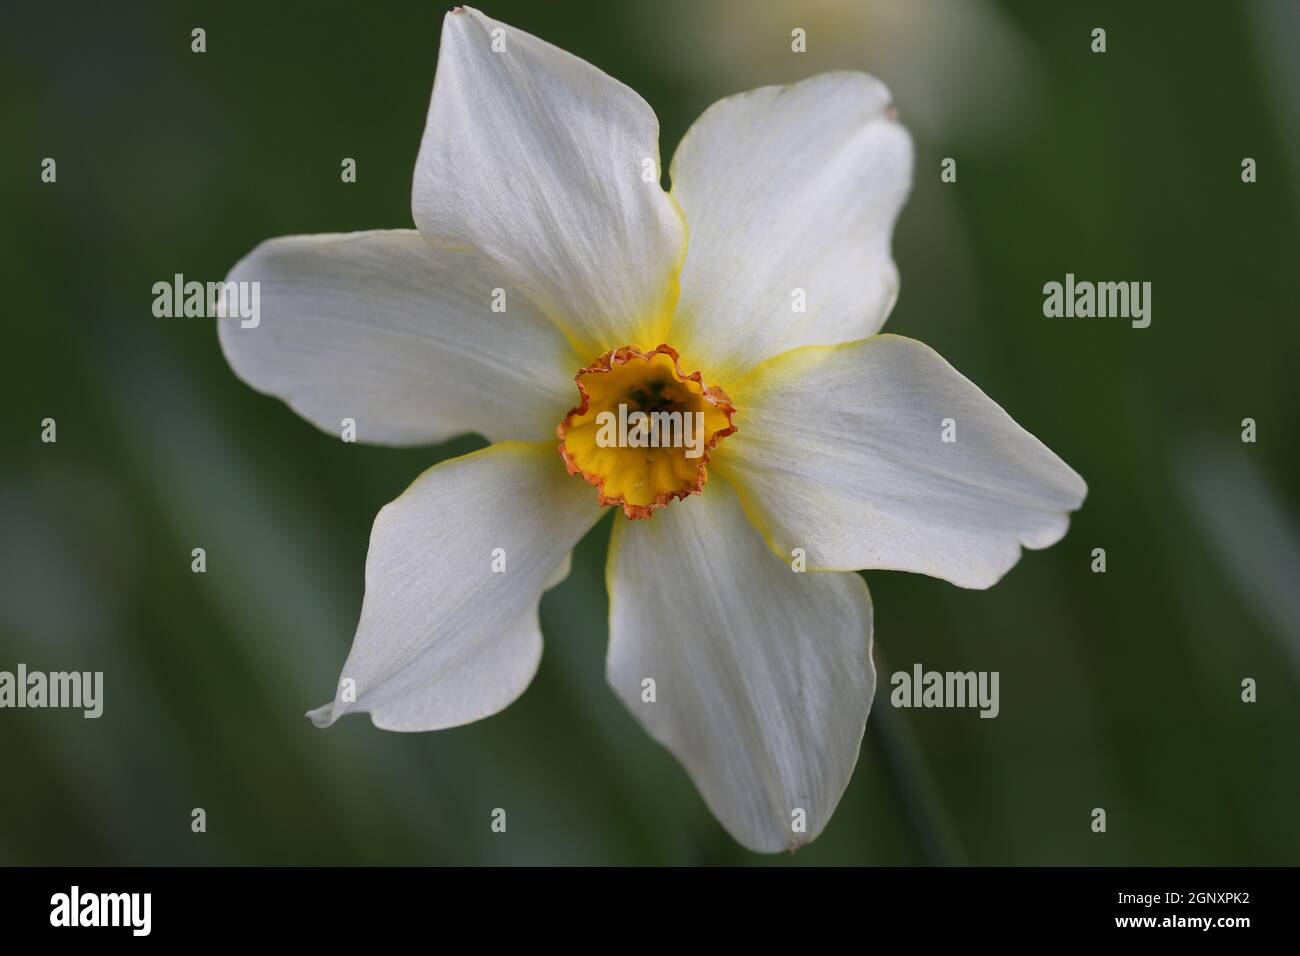 Small cup daffodil flower in close up with white petals and orange centre cup with red margin and a background of blurred leaves, stems and flowers. Stock Photo